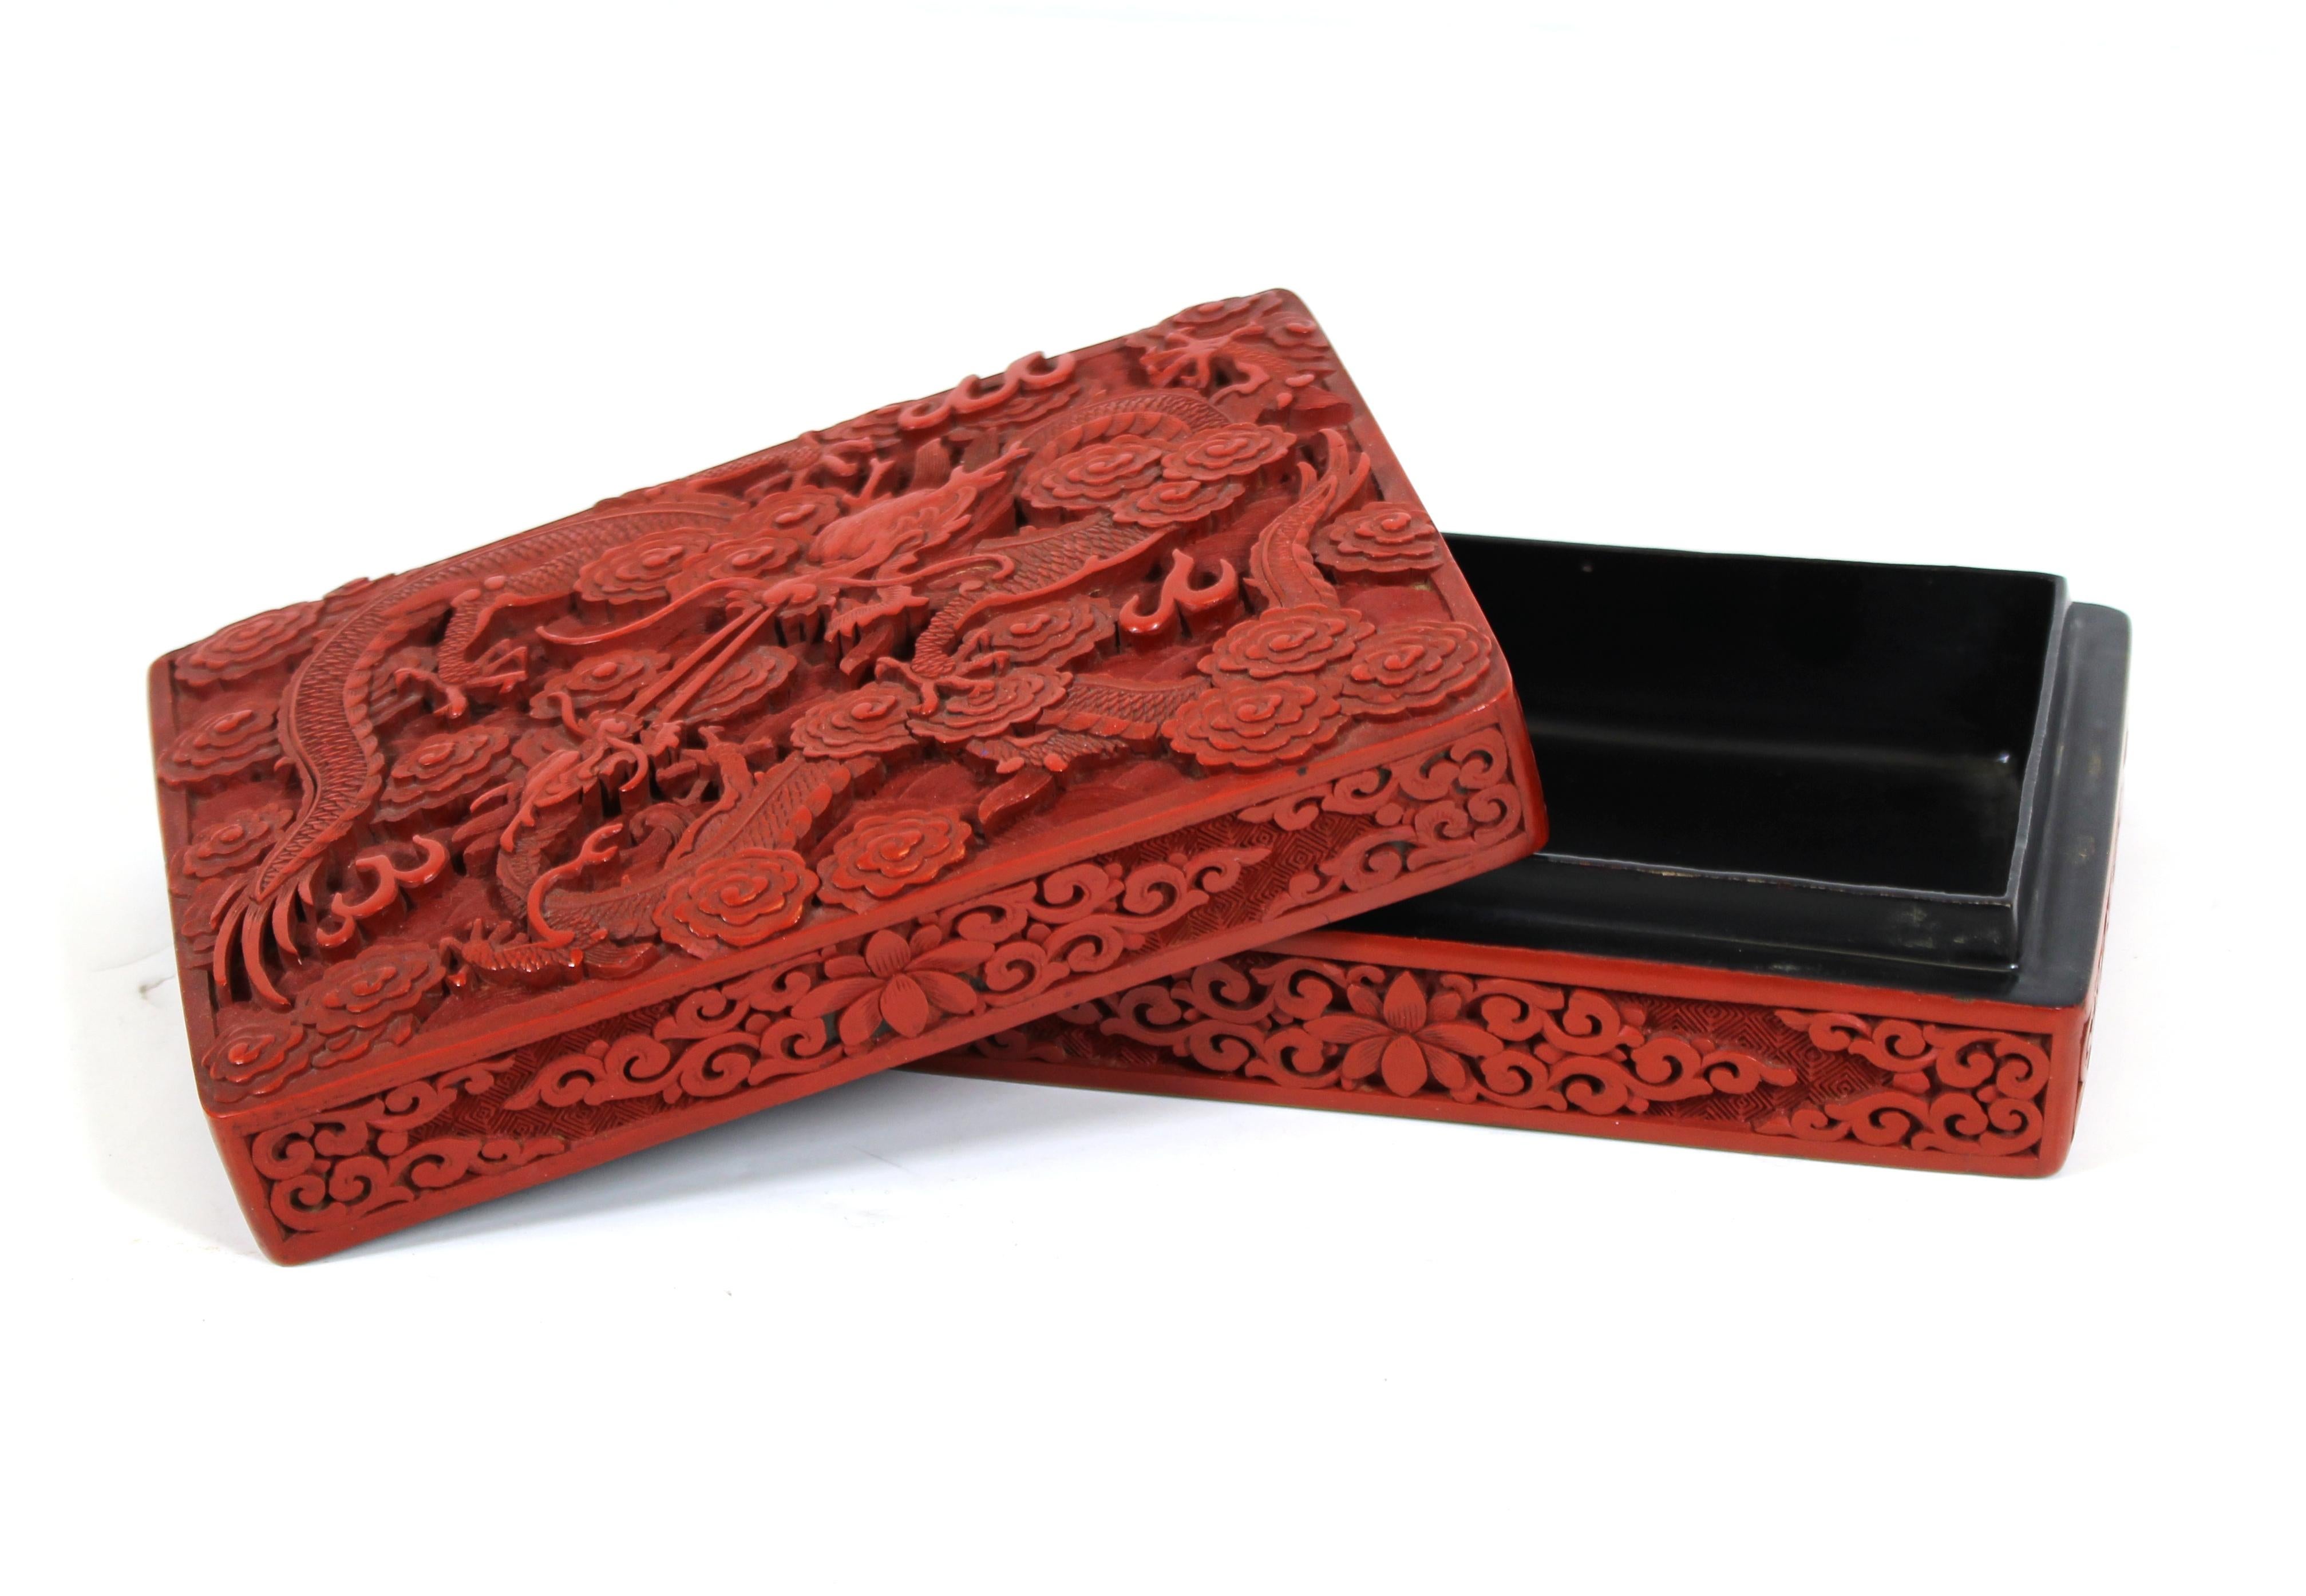 Wood Chinese Red Cinnabar Box with Dragon Motif